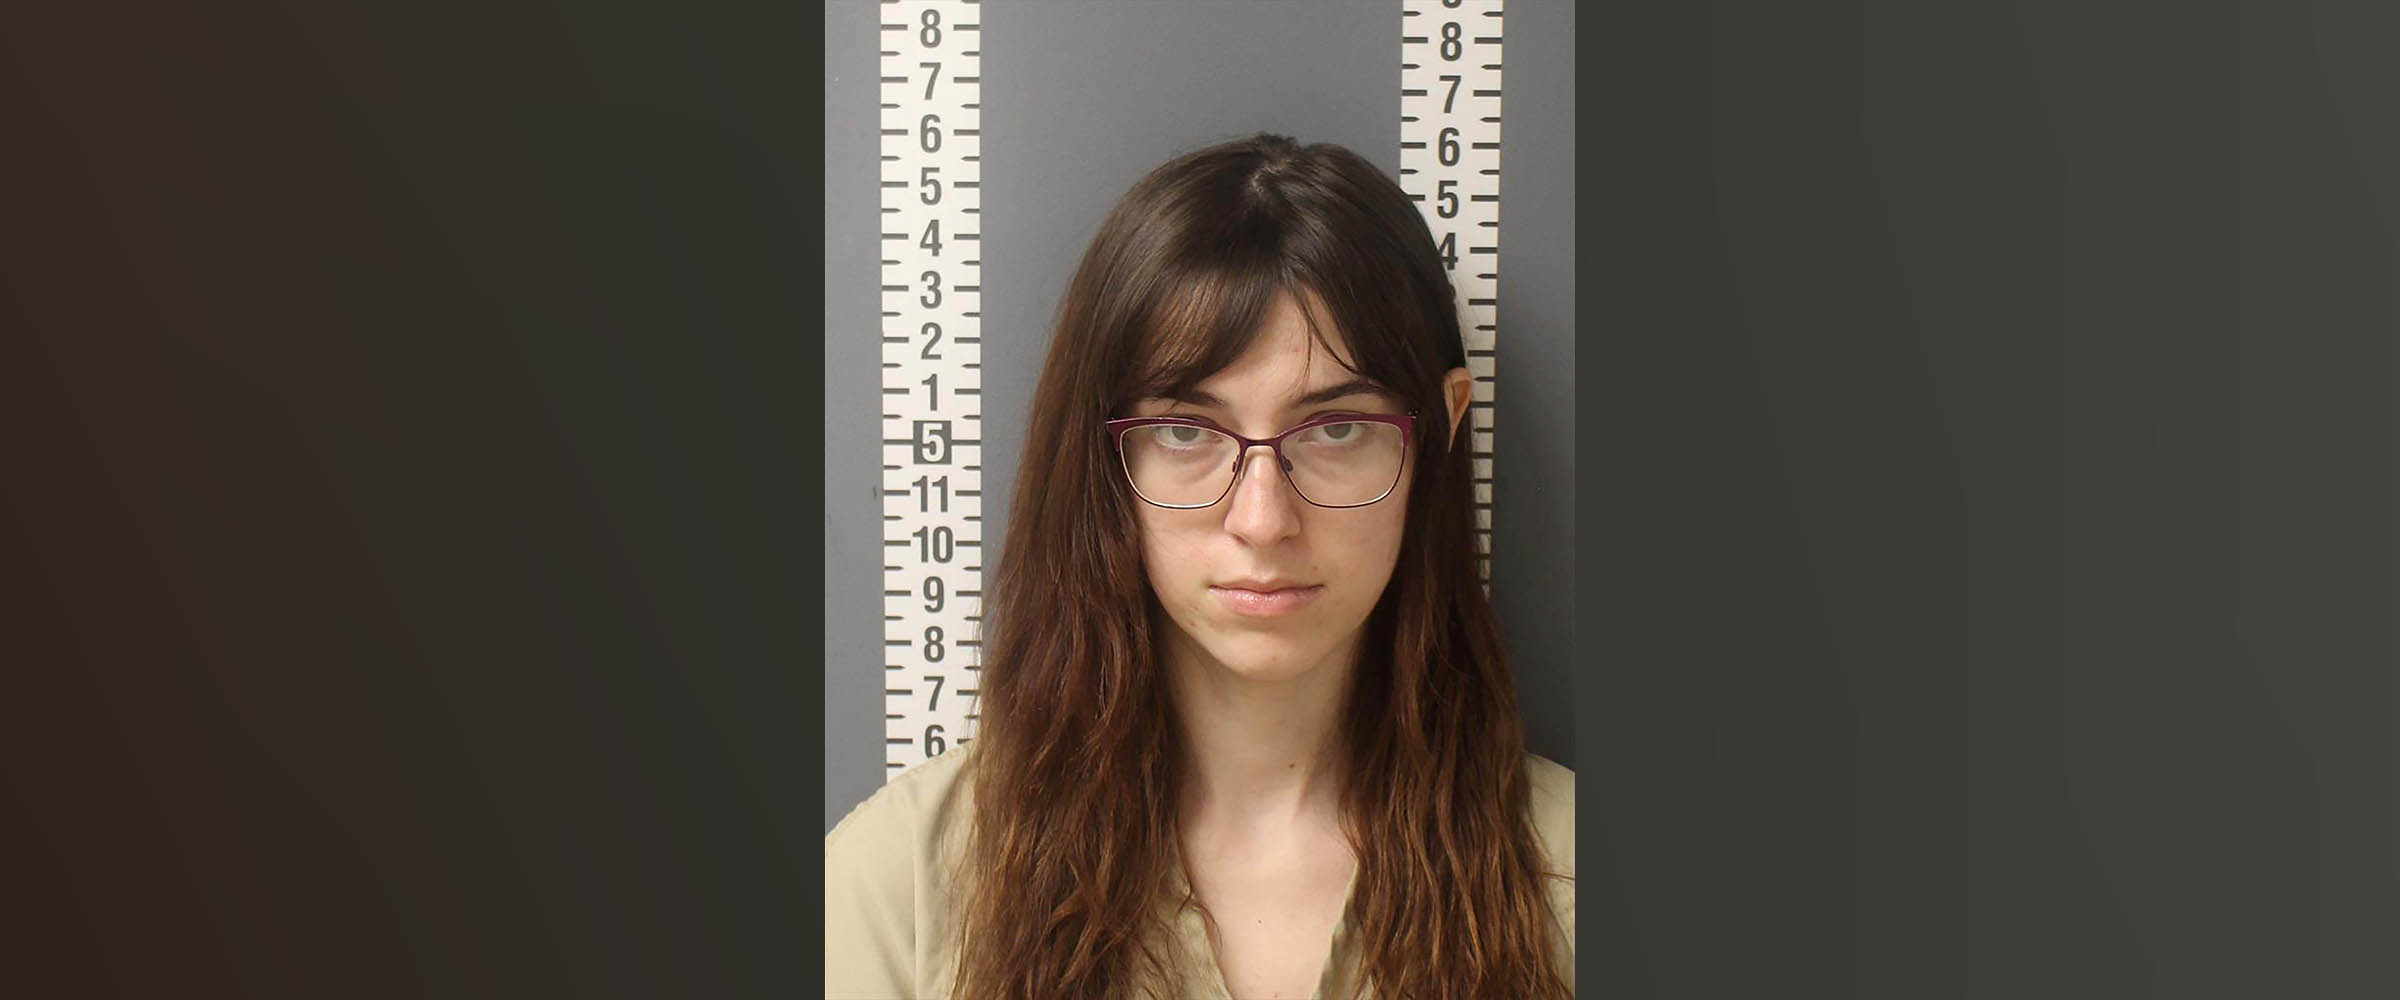 PHOTO: Riley June Williams is seen in a booking photograph obtained from the Dauphin County Prison in Harrisburg, Penn., Jan. 19, 2021.